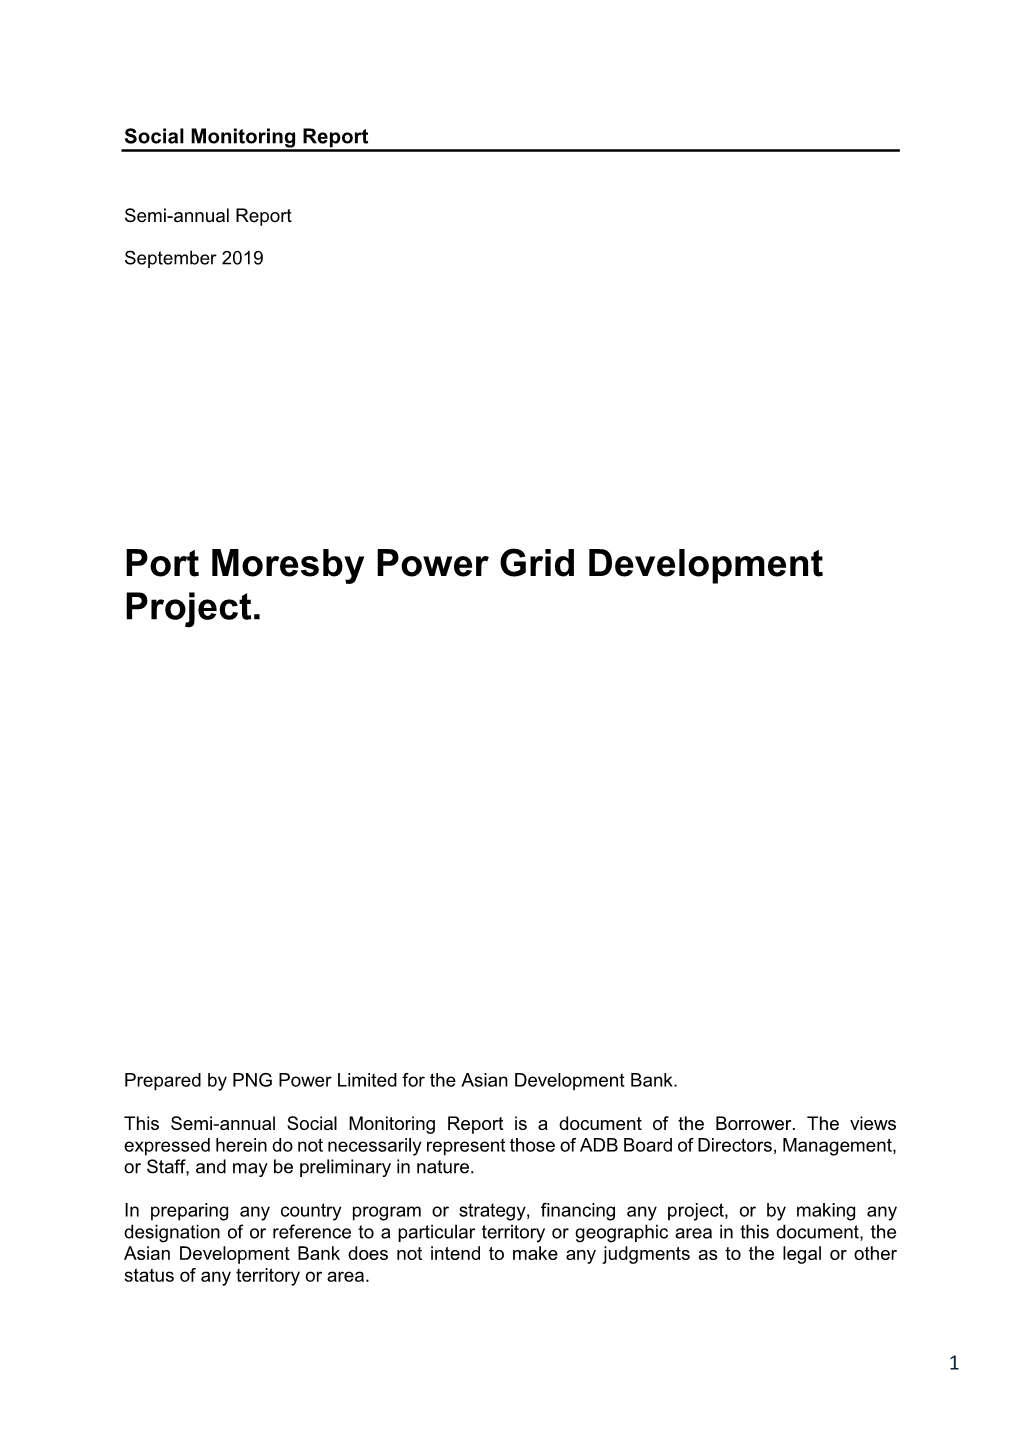 43197-013: Port Moresby Power Grid Development Project